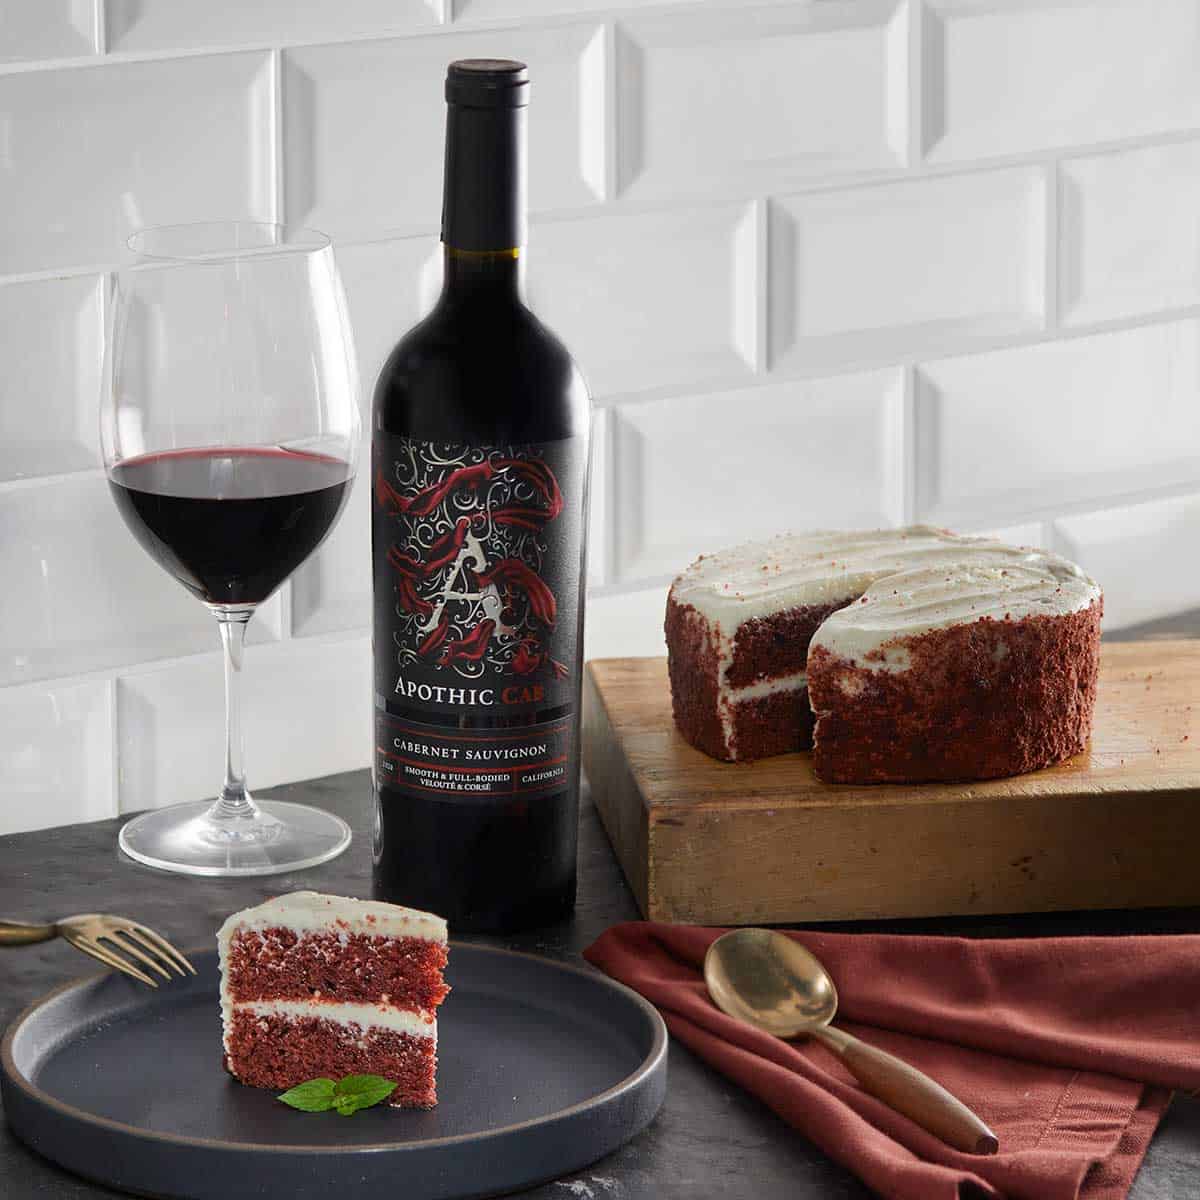 A red velvet cake in a plate in front of a glass and a bottle of Apothic Cab